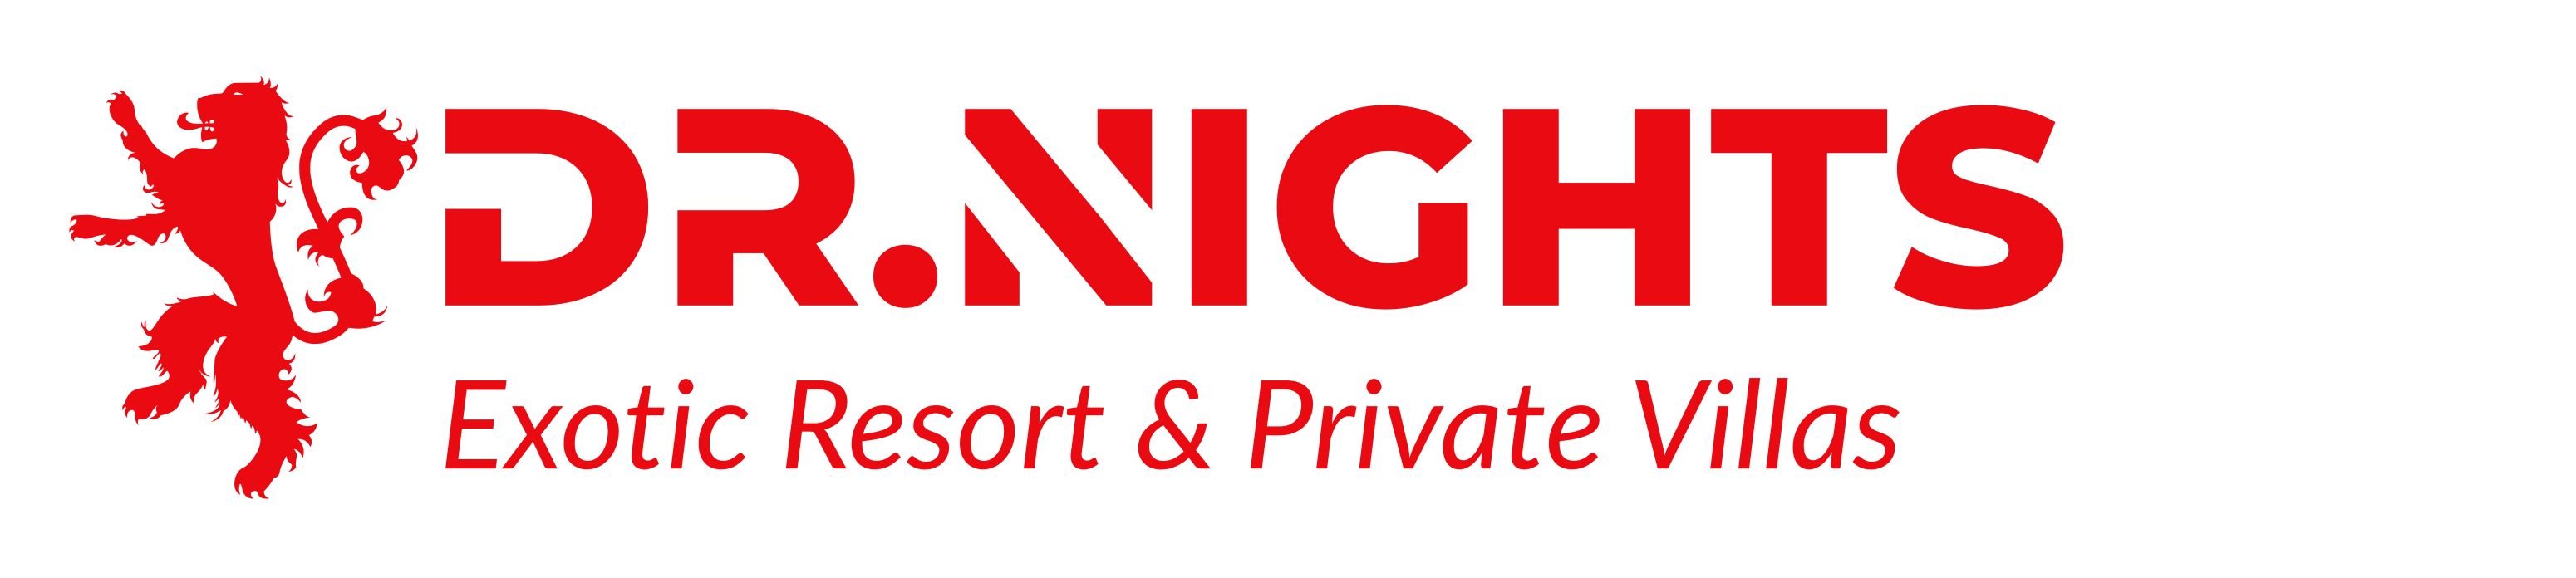 DR Nights Exotic Resort and Private Villas - Affiliate Program